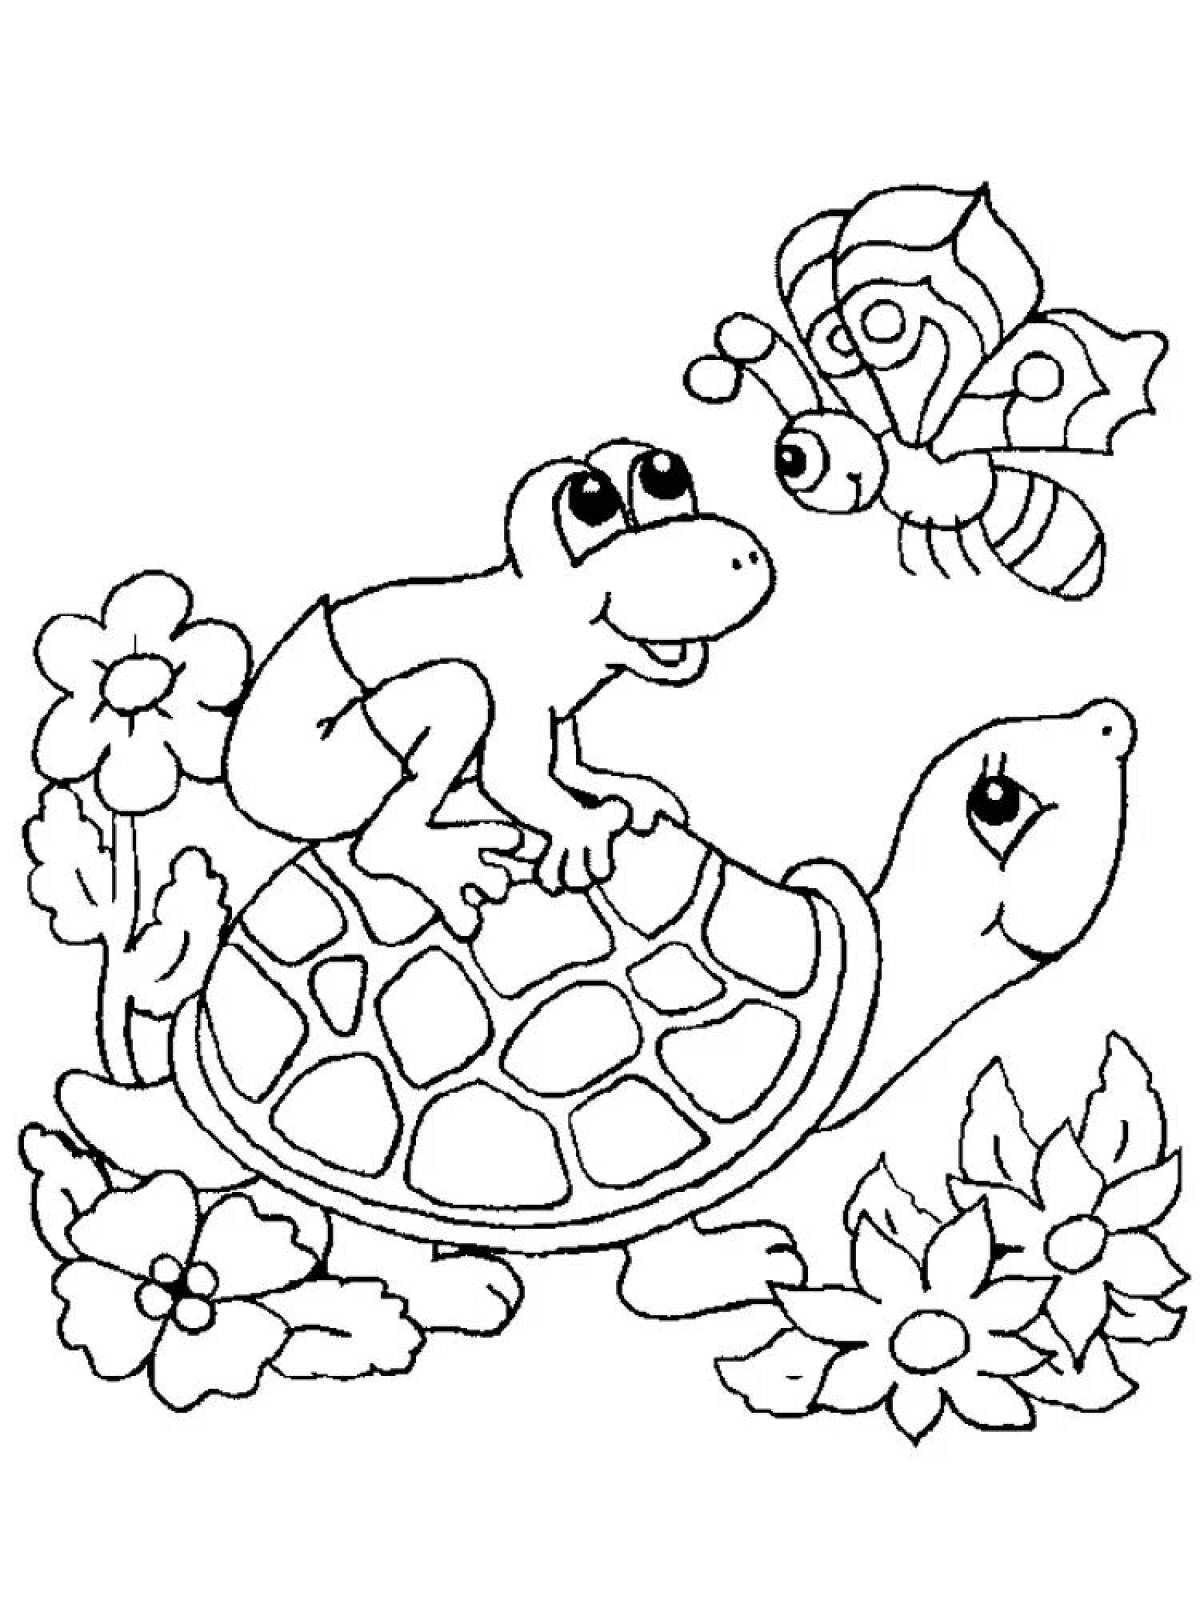 Magic turtle coloring book for 3-4 year olds